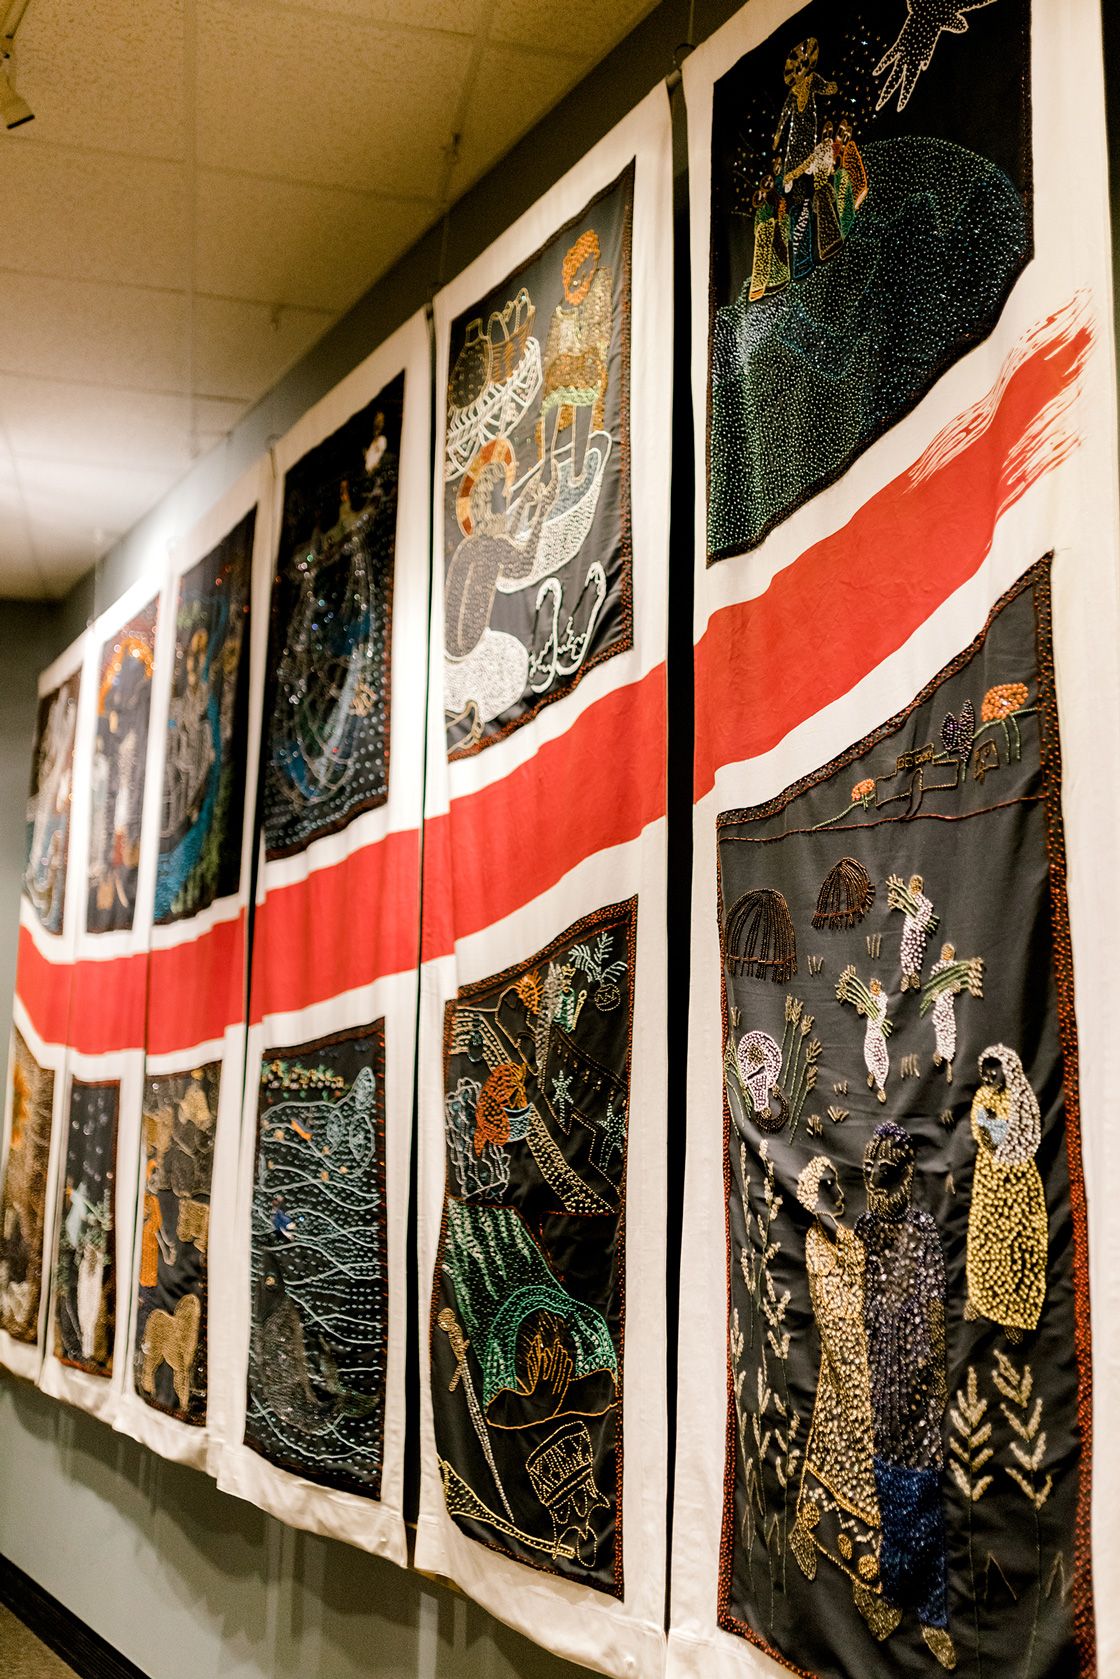 The Cape Town Banners of Reconciliation show beautiful, beaded depictions of various stories from both the Old and New Testament.